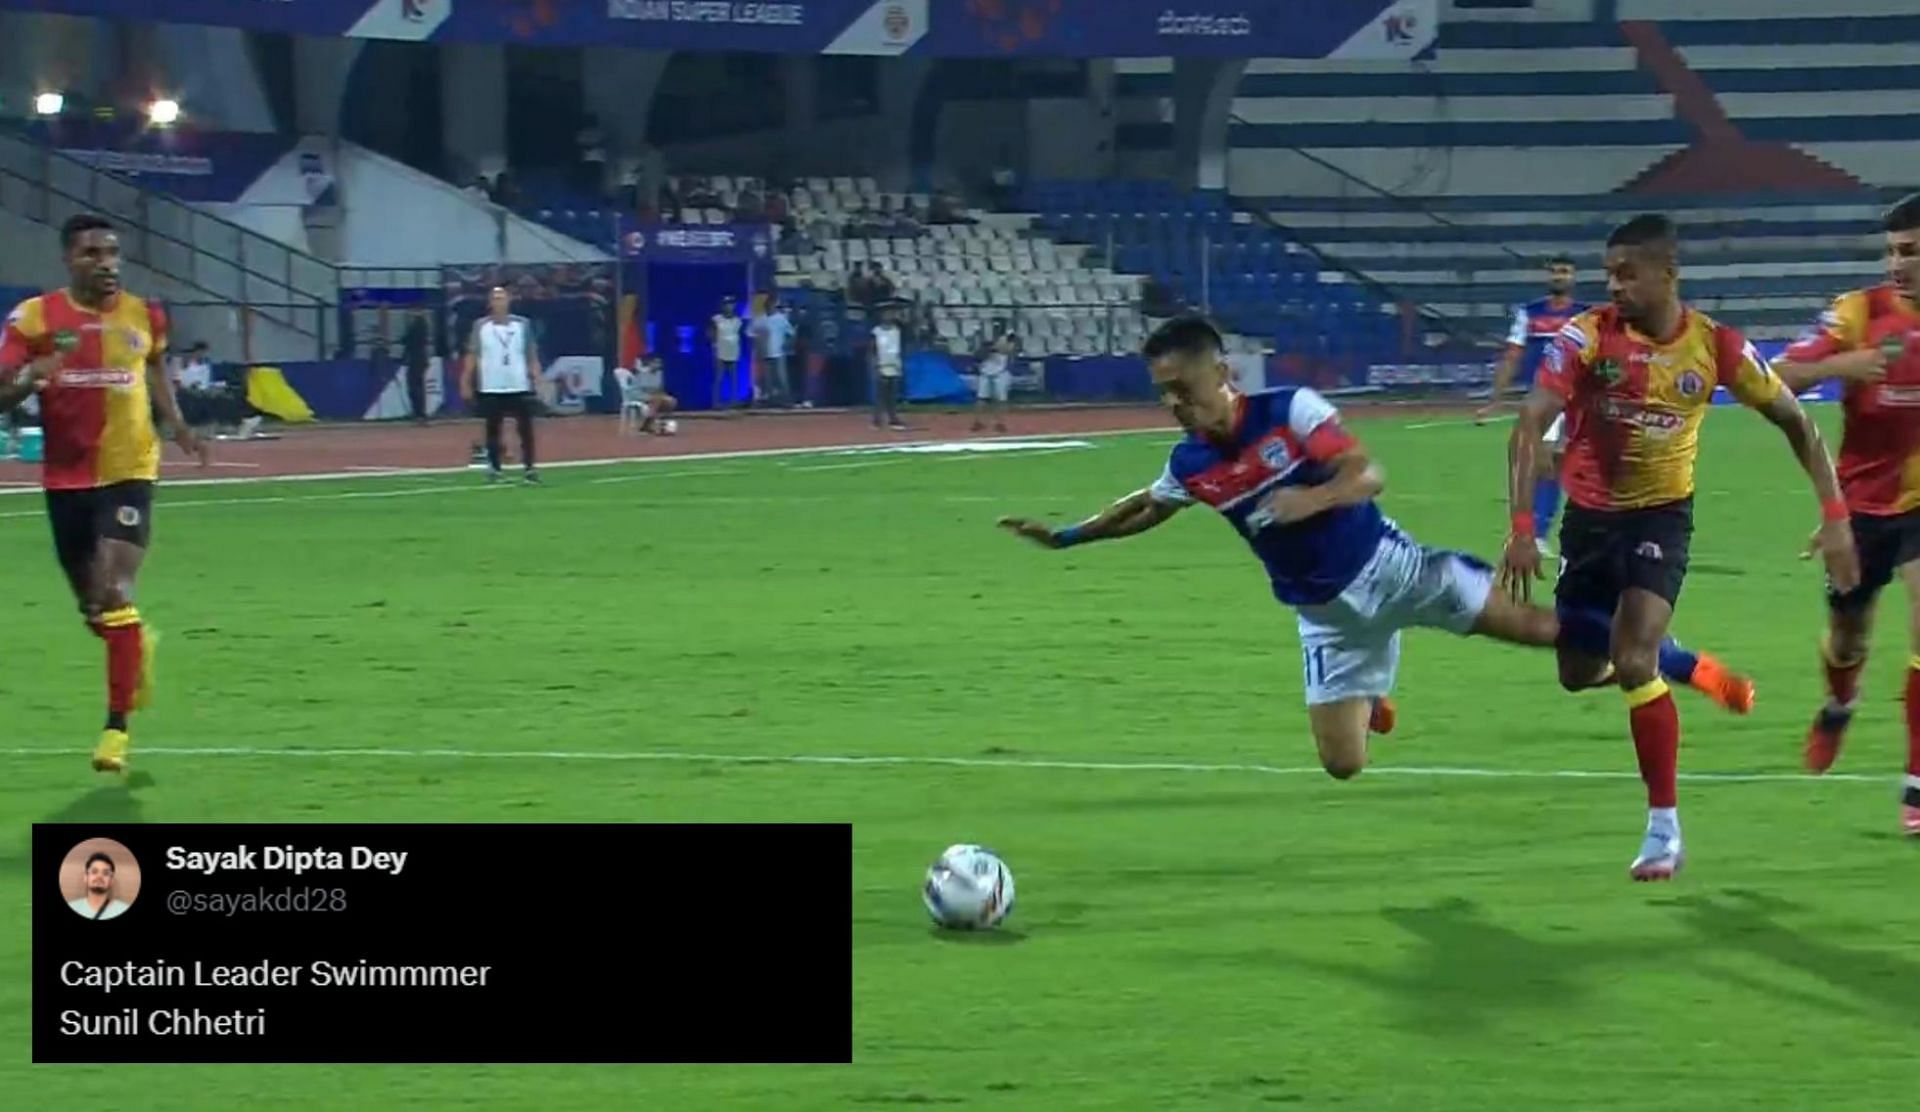 Sunil Chhetri won the penalty for Bengaluru FC in the clash against East Bengal.